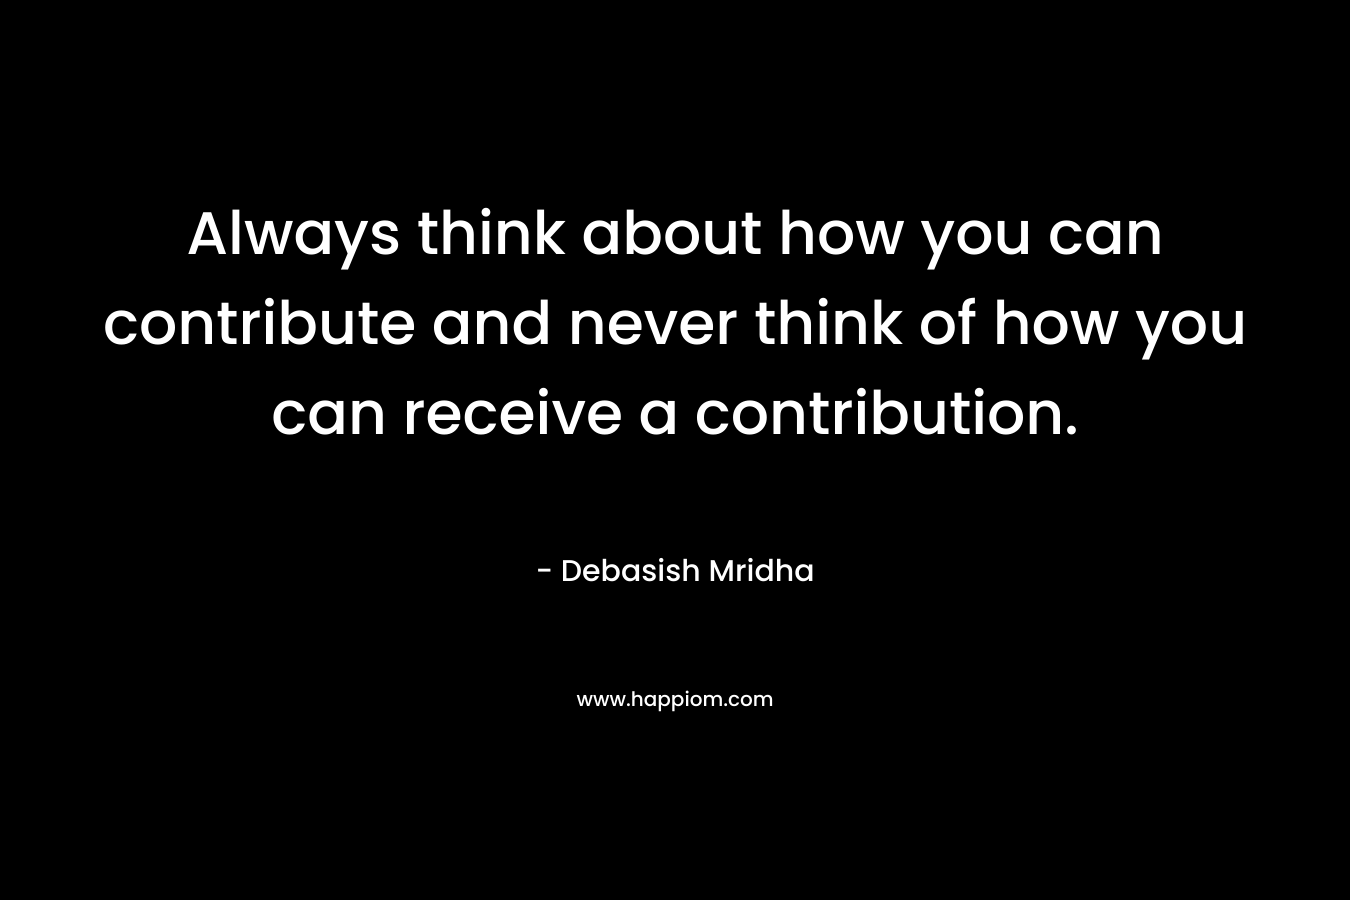 Always think about how you can contribute and never think of how you can receive a contribution.